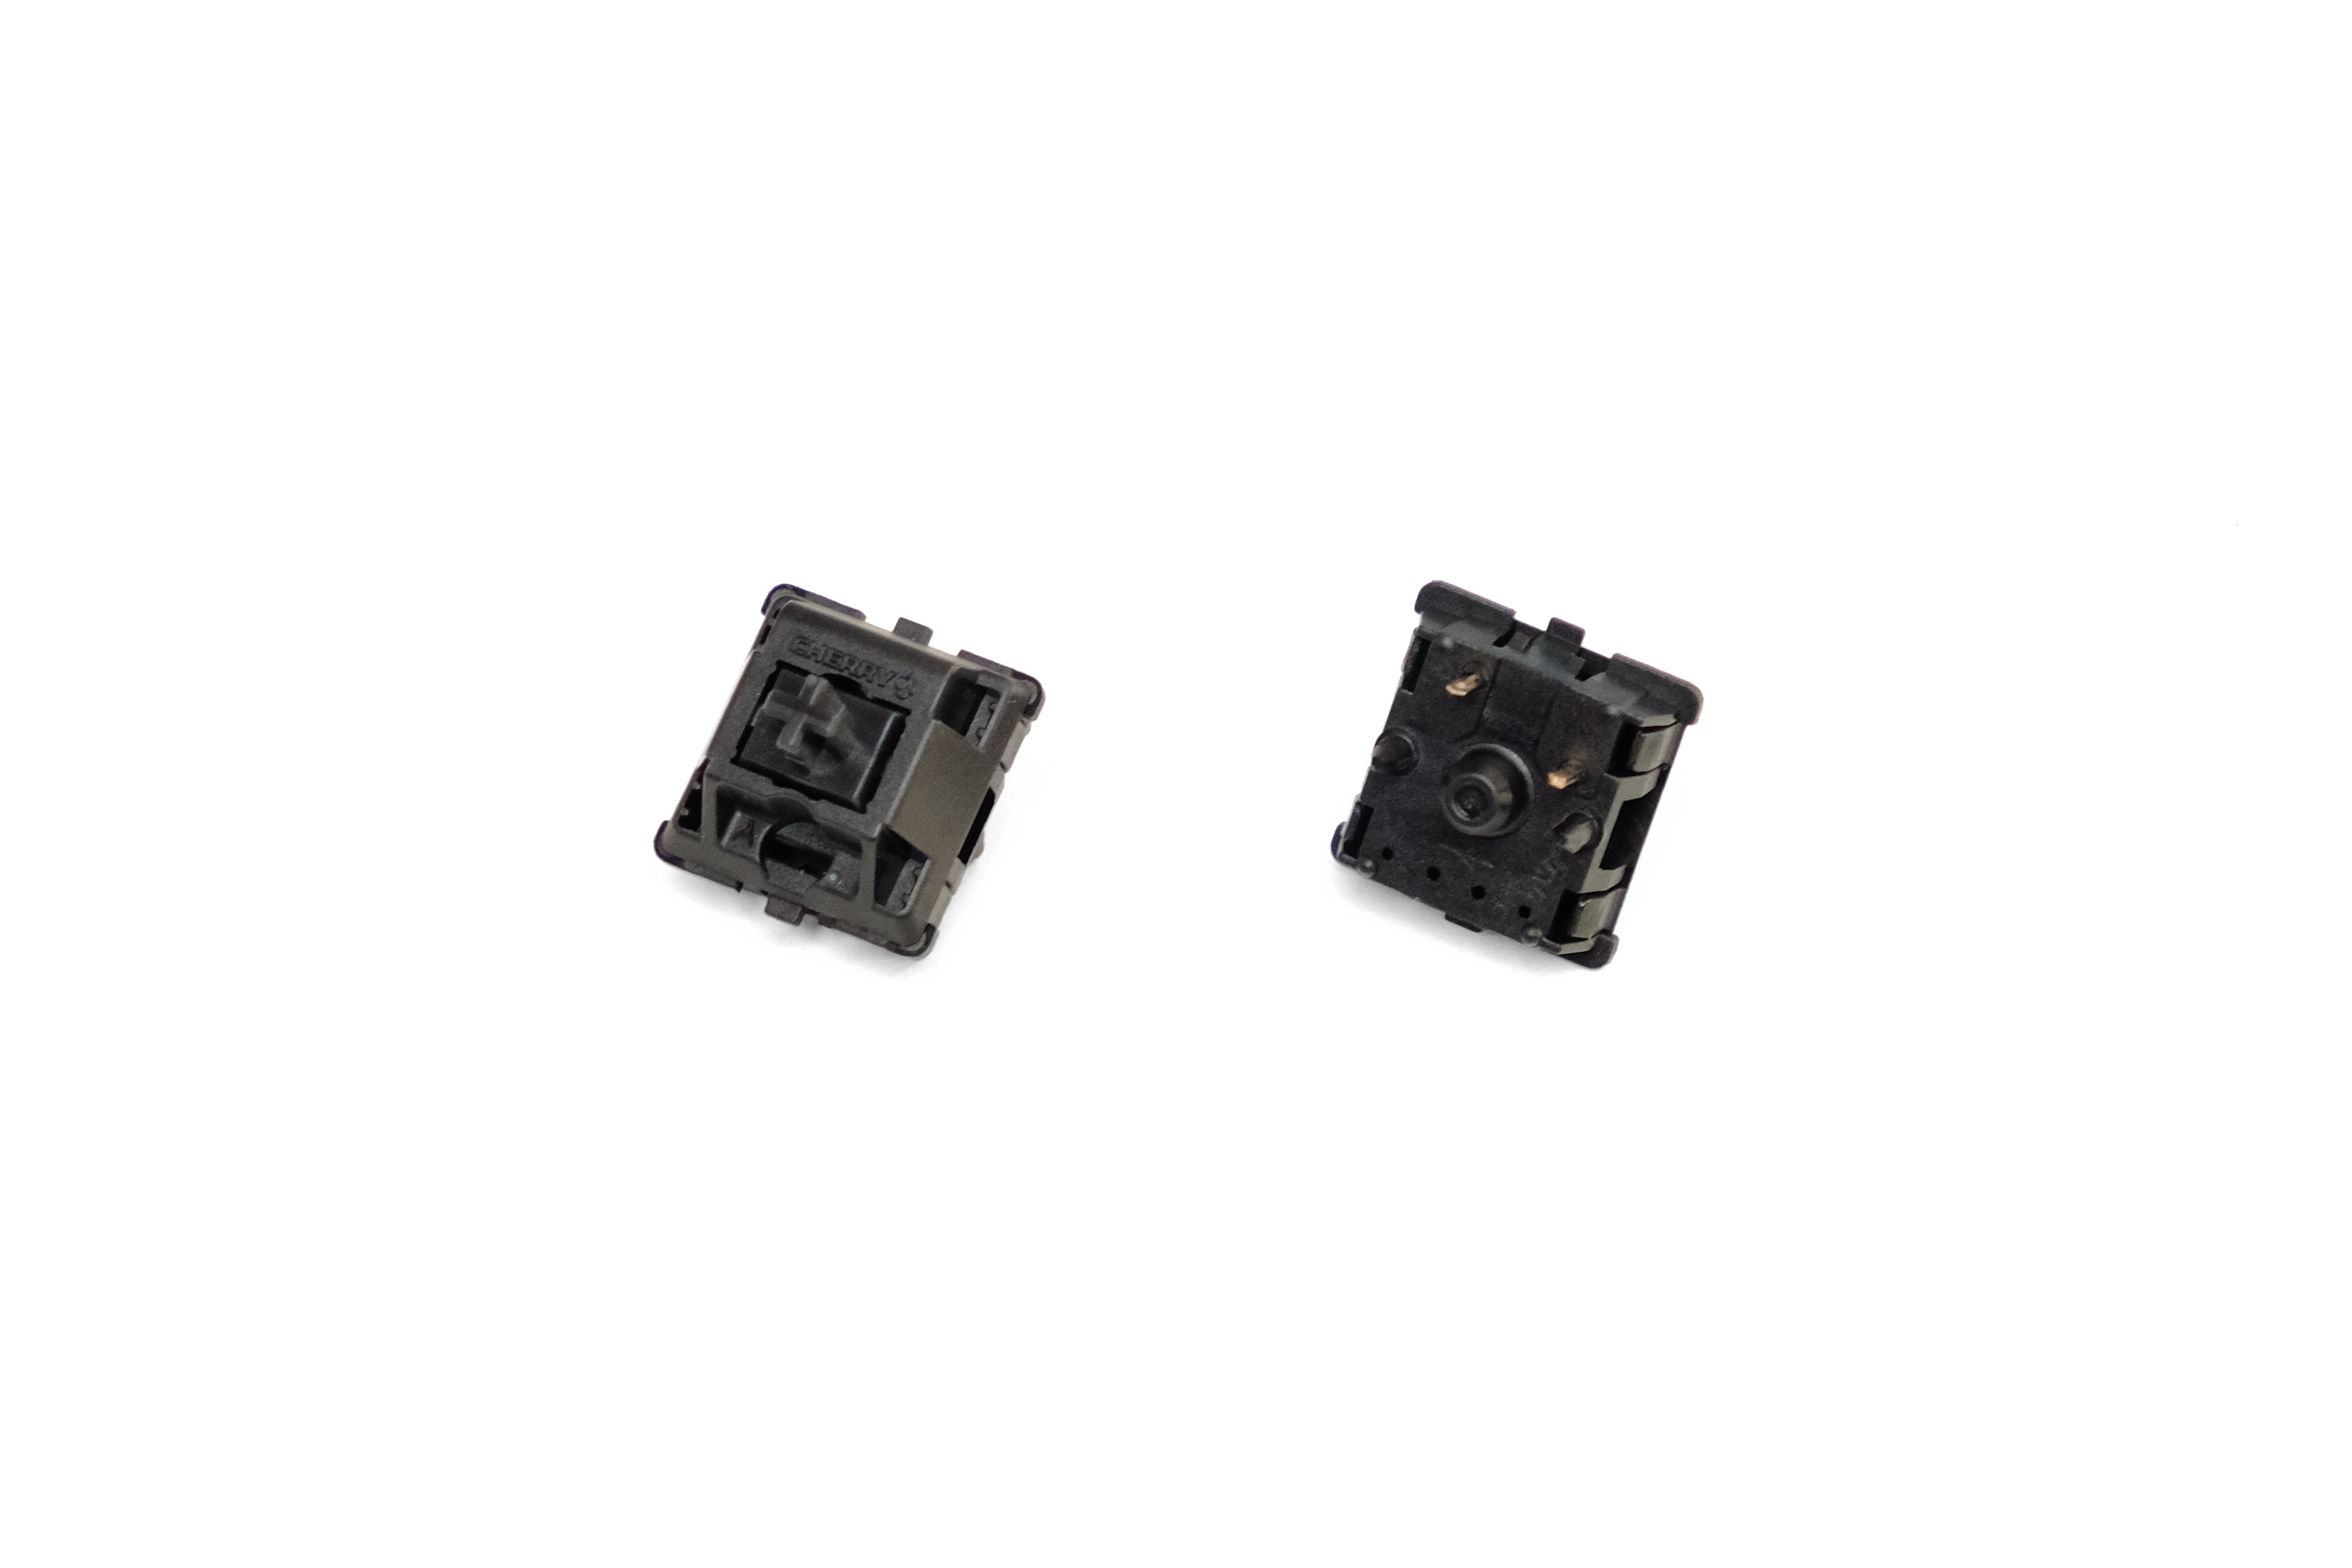 Cherry MX Hyperglide Black Linear Switches at KeebsForAll